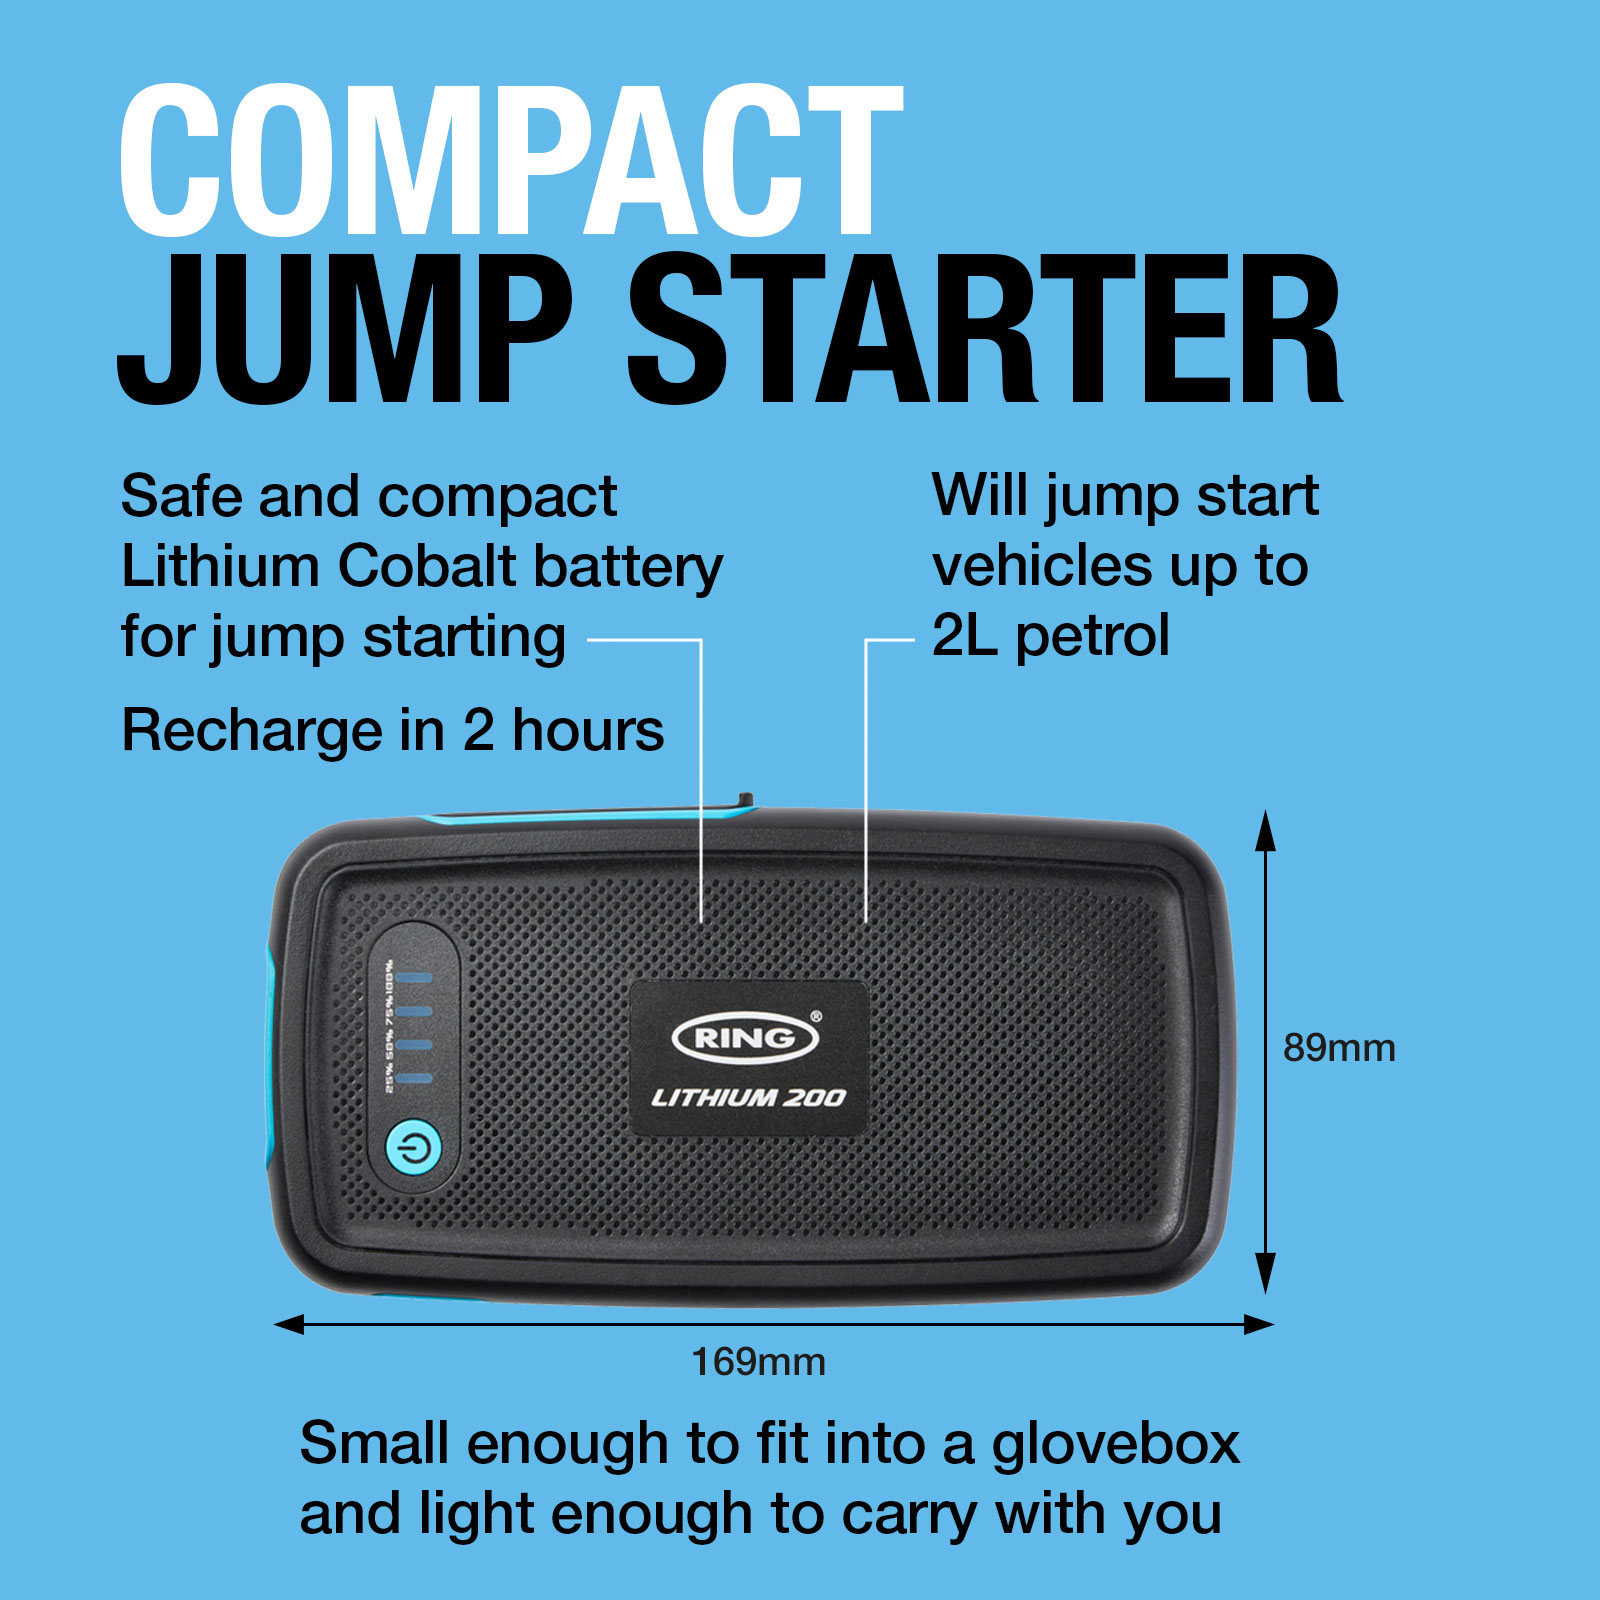 Jump Starters & Battery Care